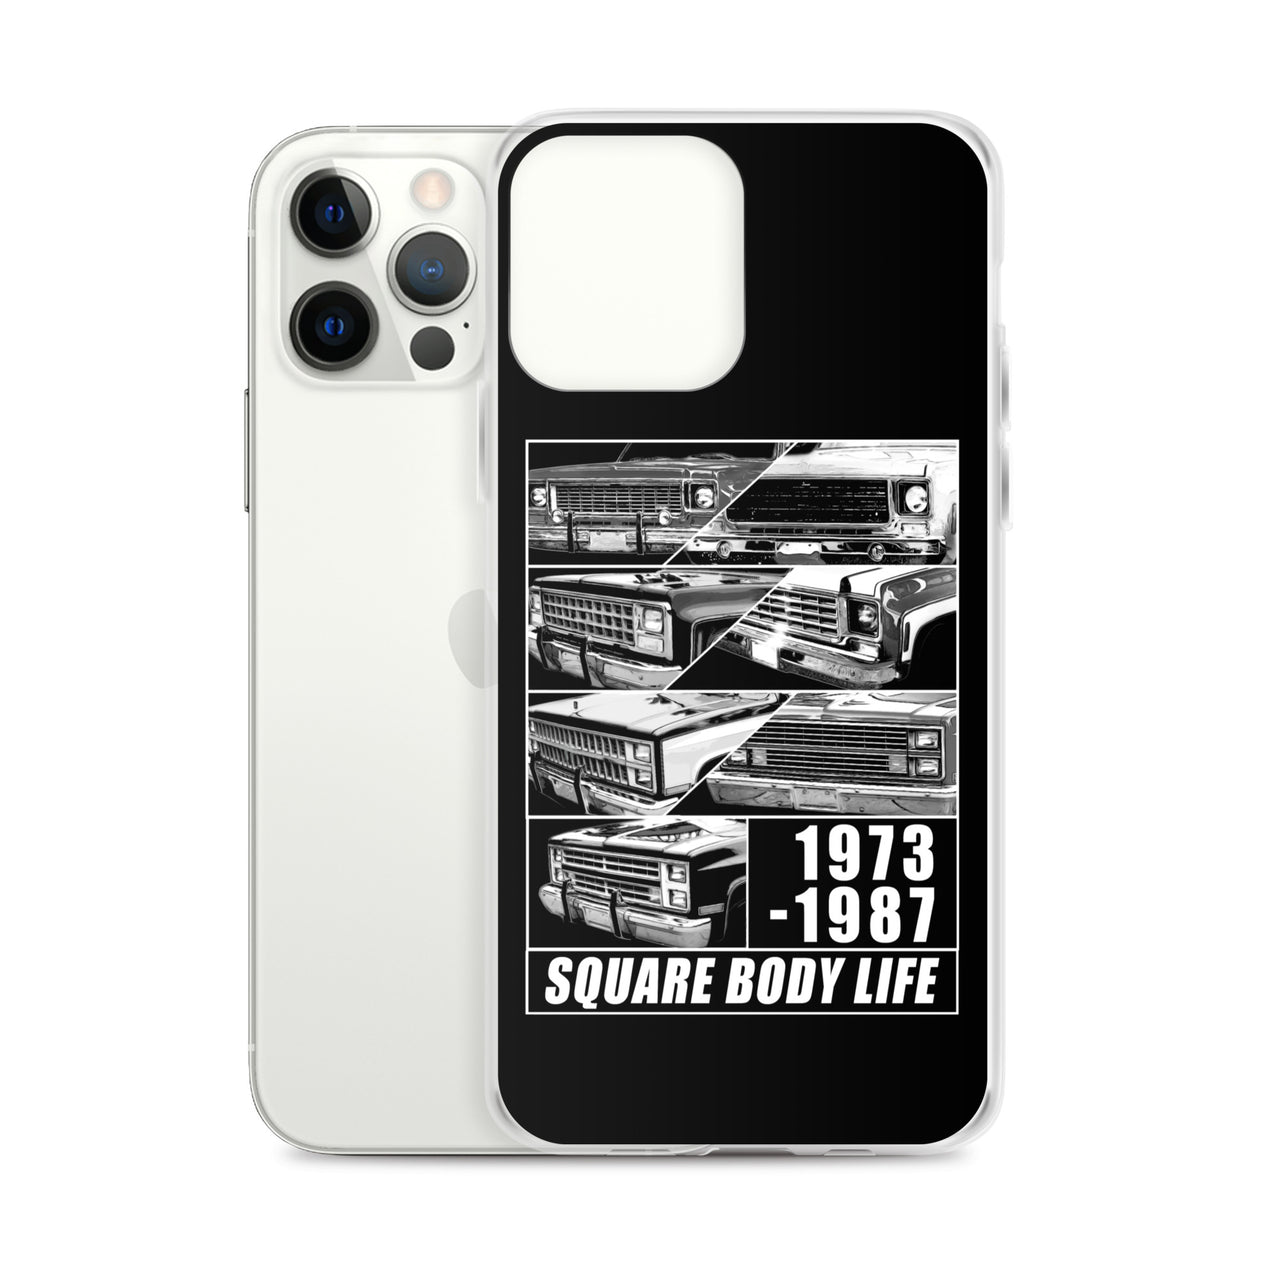 Square Body Truck Grilles Phone Case For iPhone 12 pro max